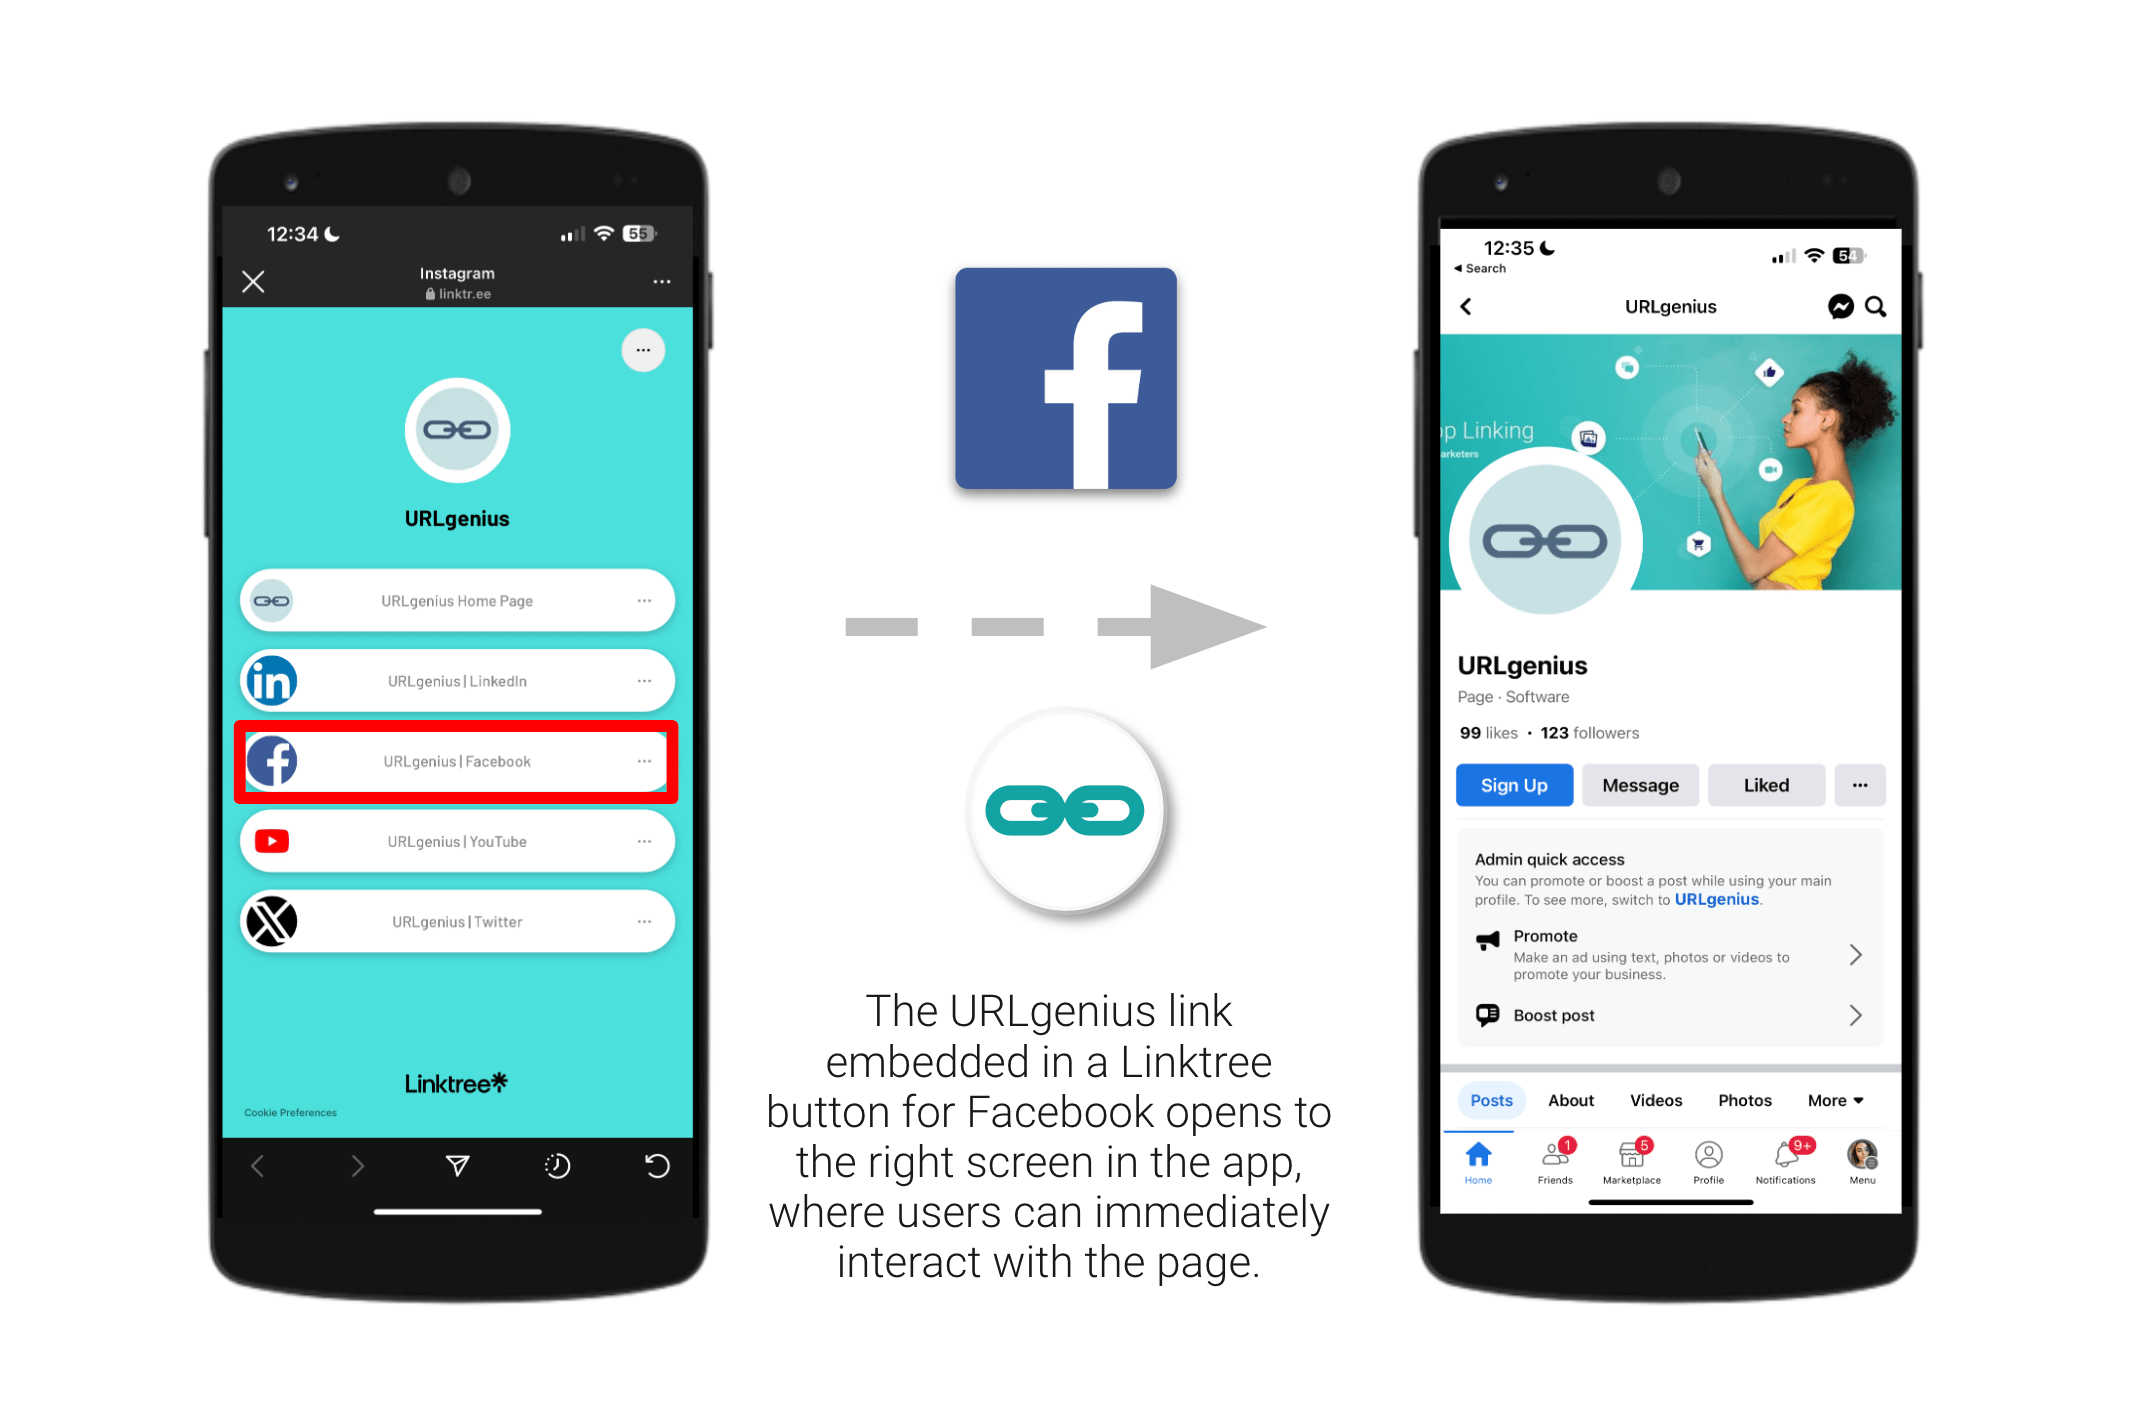 The URLgenius link embedded in a Linktree button for Facebook opens the right screen in the app, where users can immediately interact with the page.